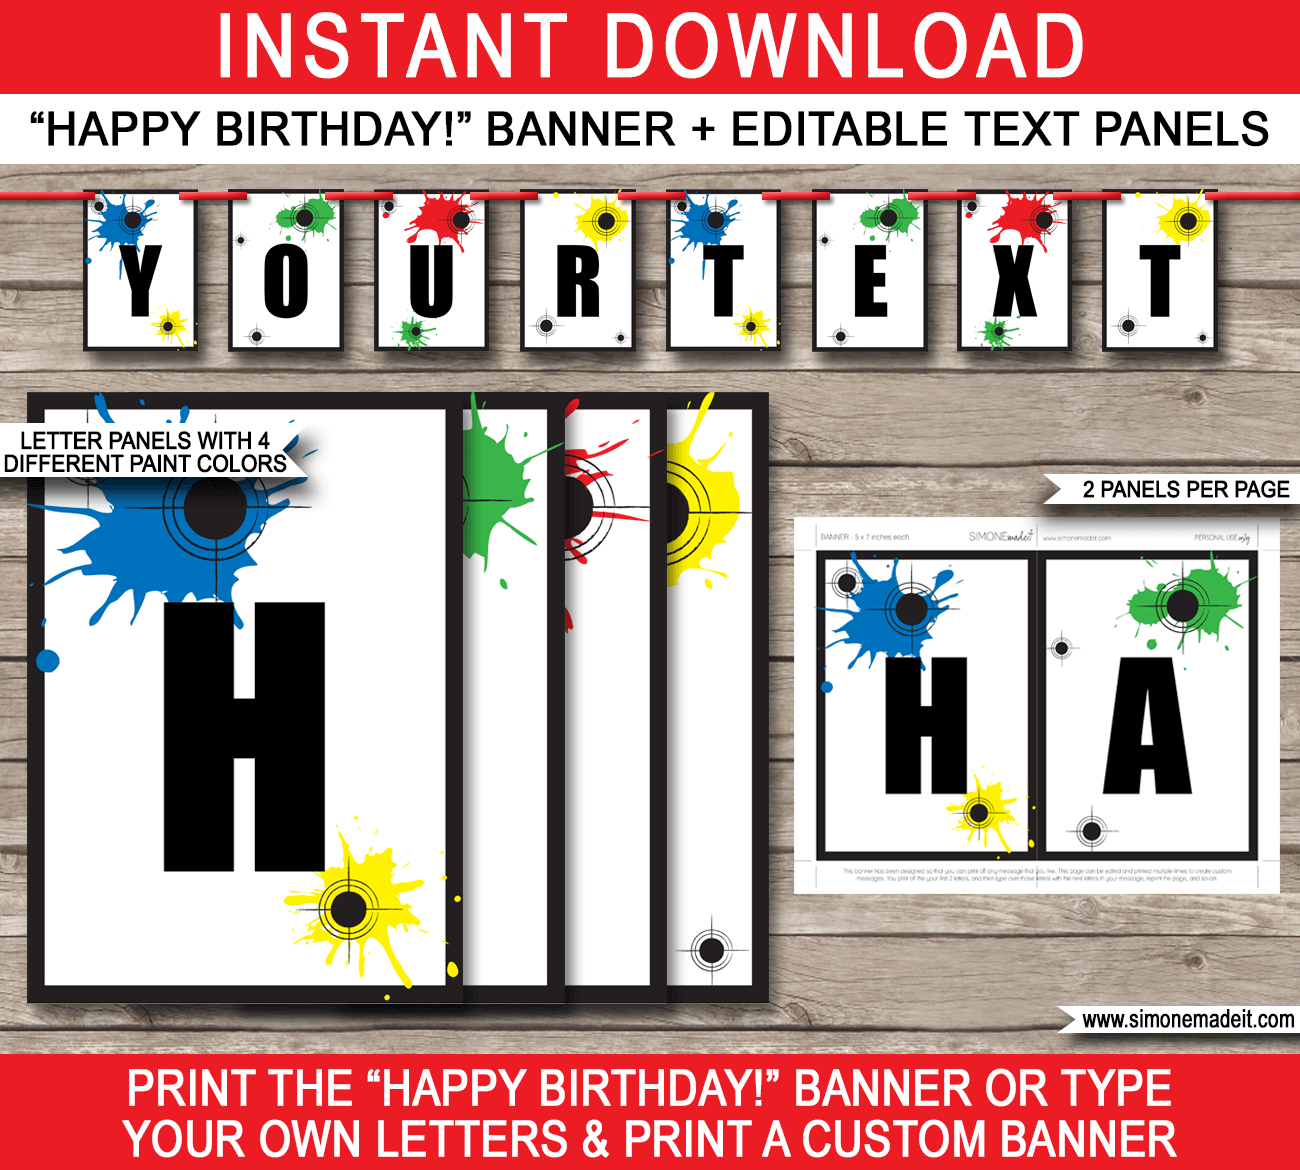 Paintball Party Banner Template - Paintball Bunting - Happy Birthday Banner - Birthday Party - Editable and Printable DIY Template - INSTANT DOWNLOAD $4.50 via simonemadeit.com